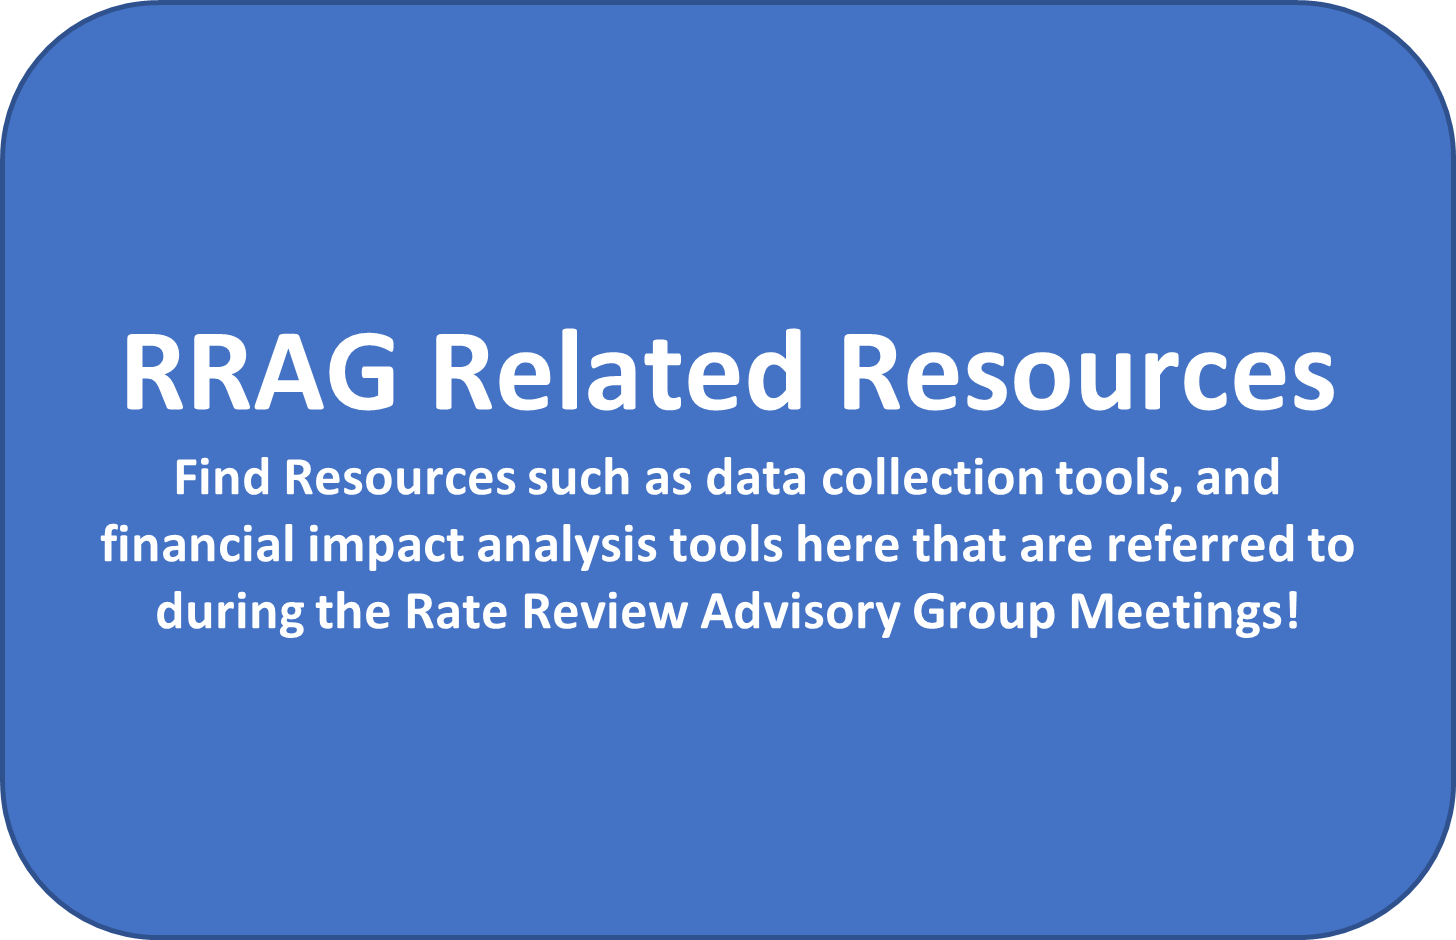 RRAG Related Resources Button.png